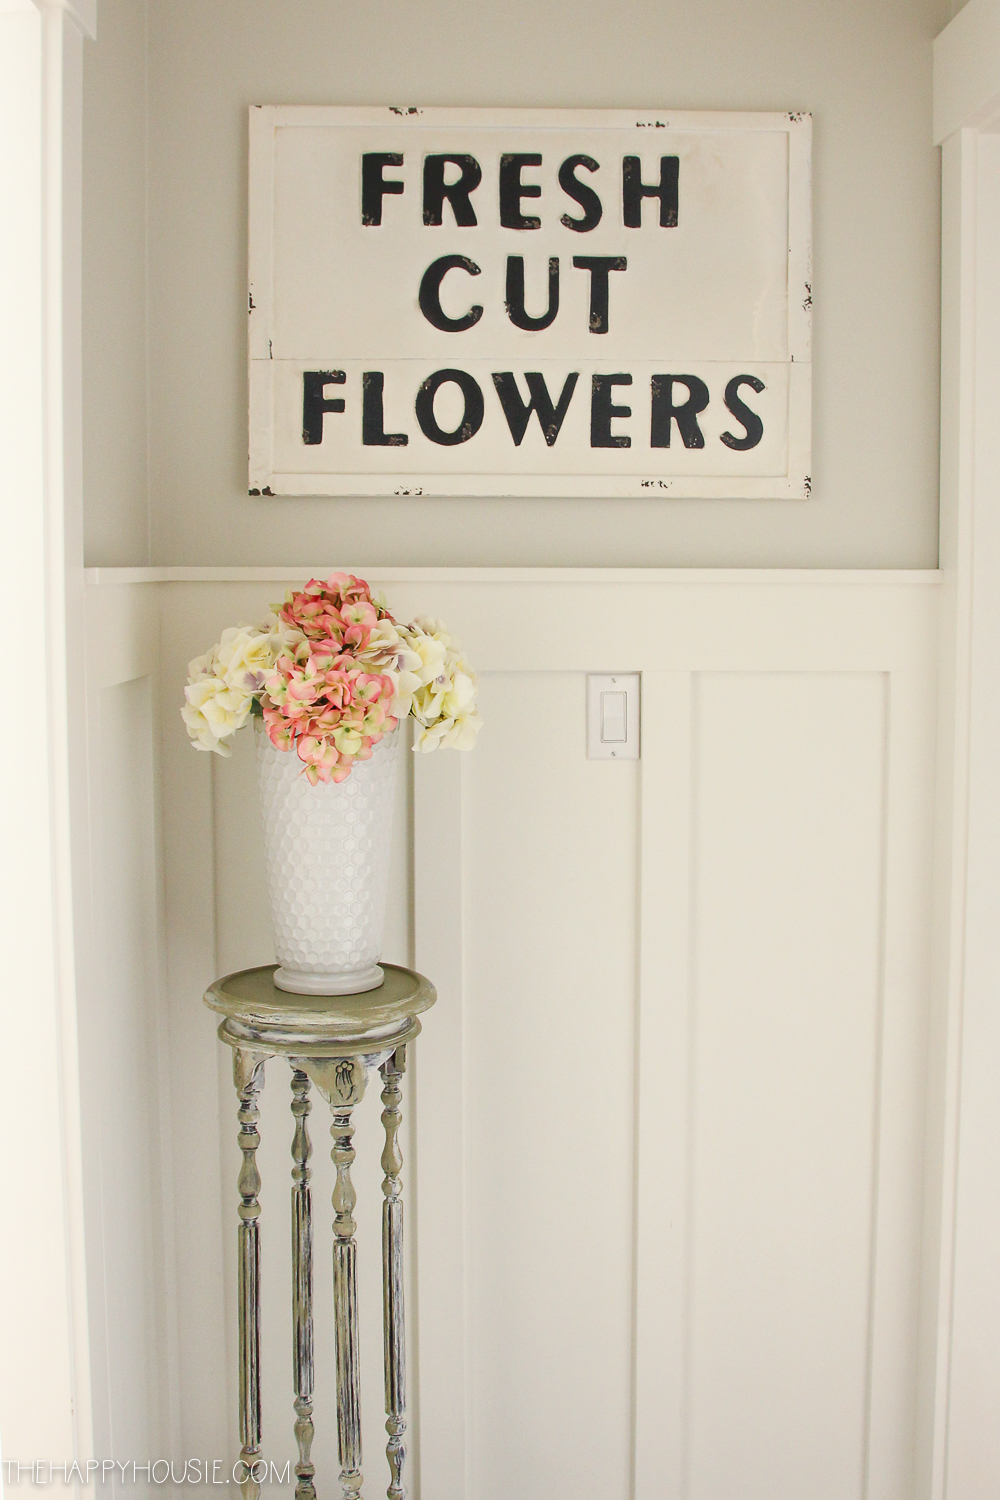 A sign on the wall saying fresh cut flowers and then a vase full of flowers underneath it.